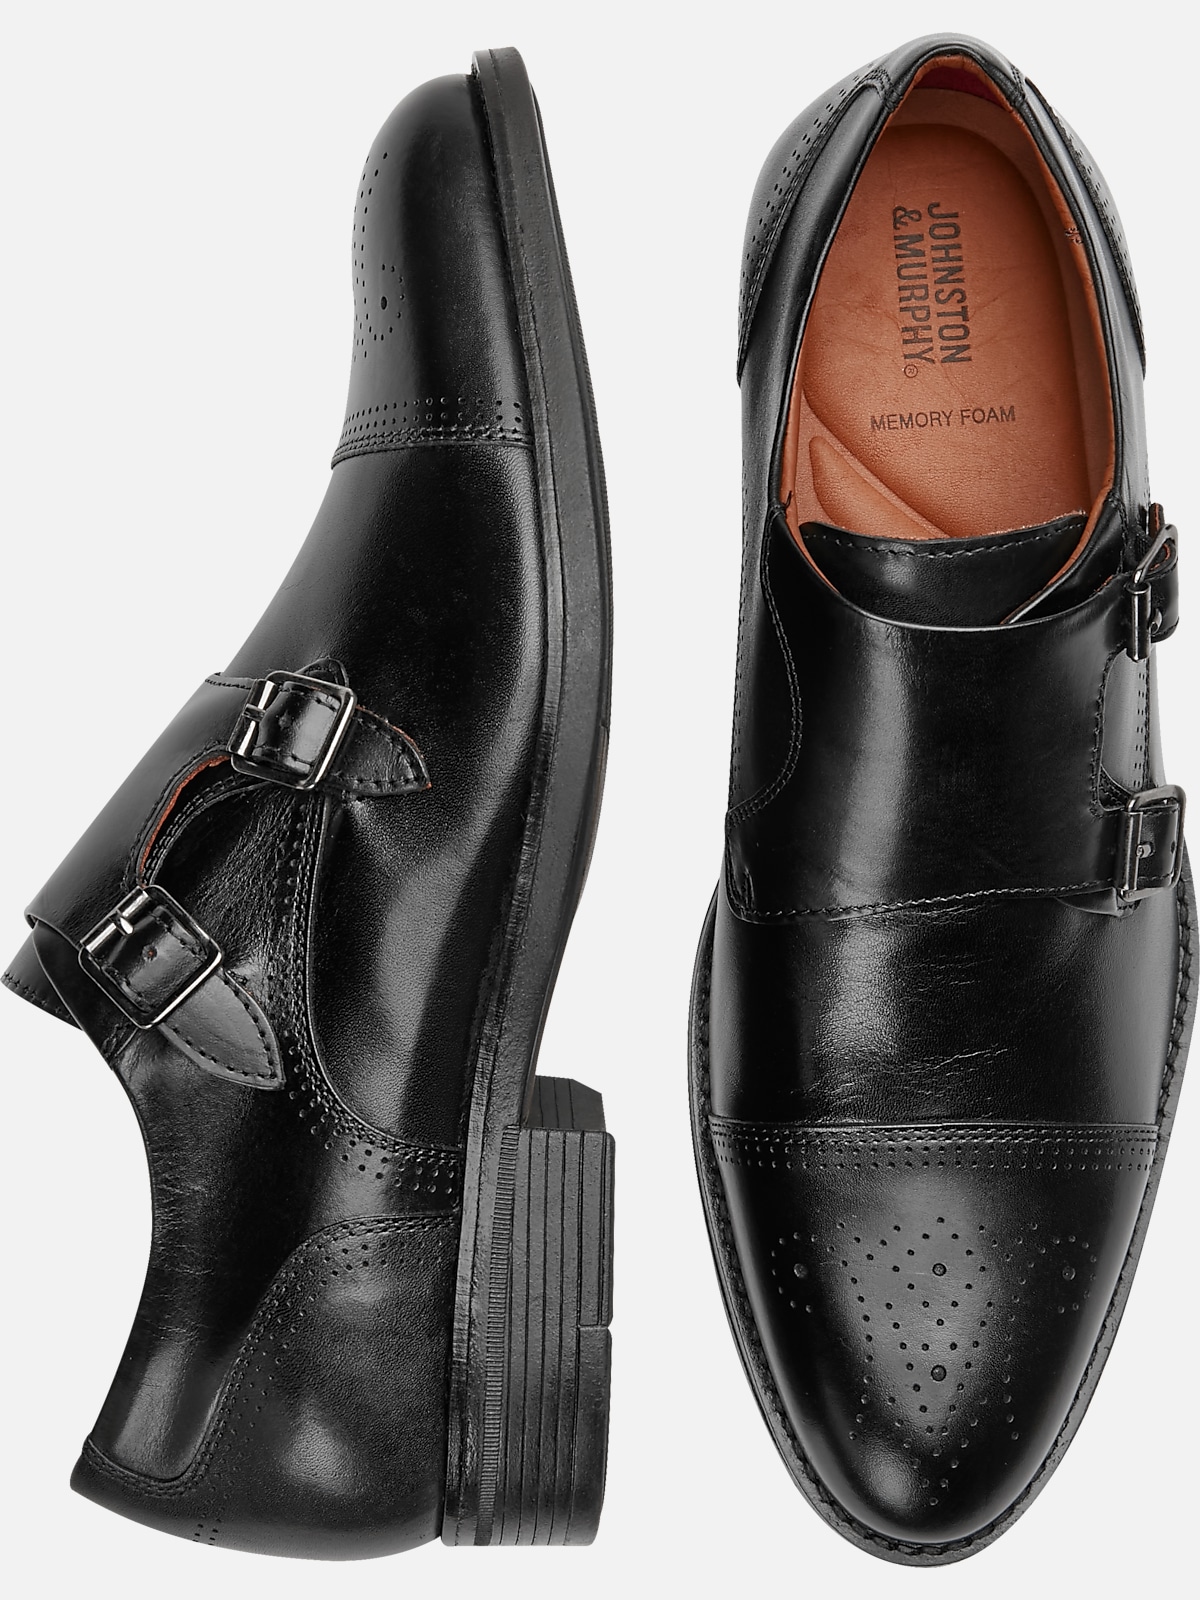 Johnston & Murphy Hawthorn Double Monk Strap Shoes | All Clearance $39. ...